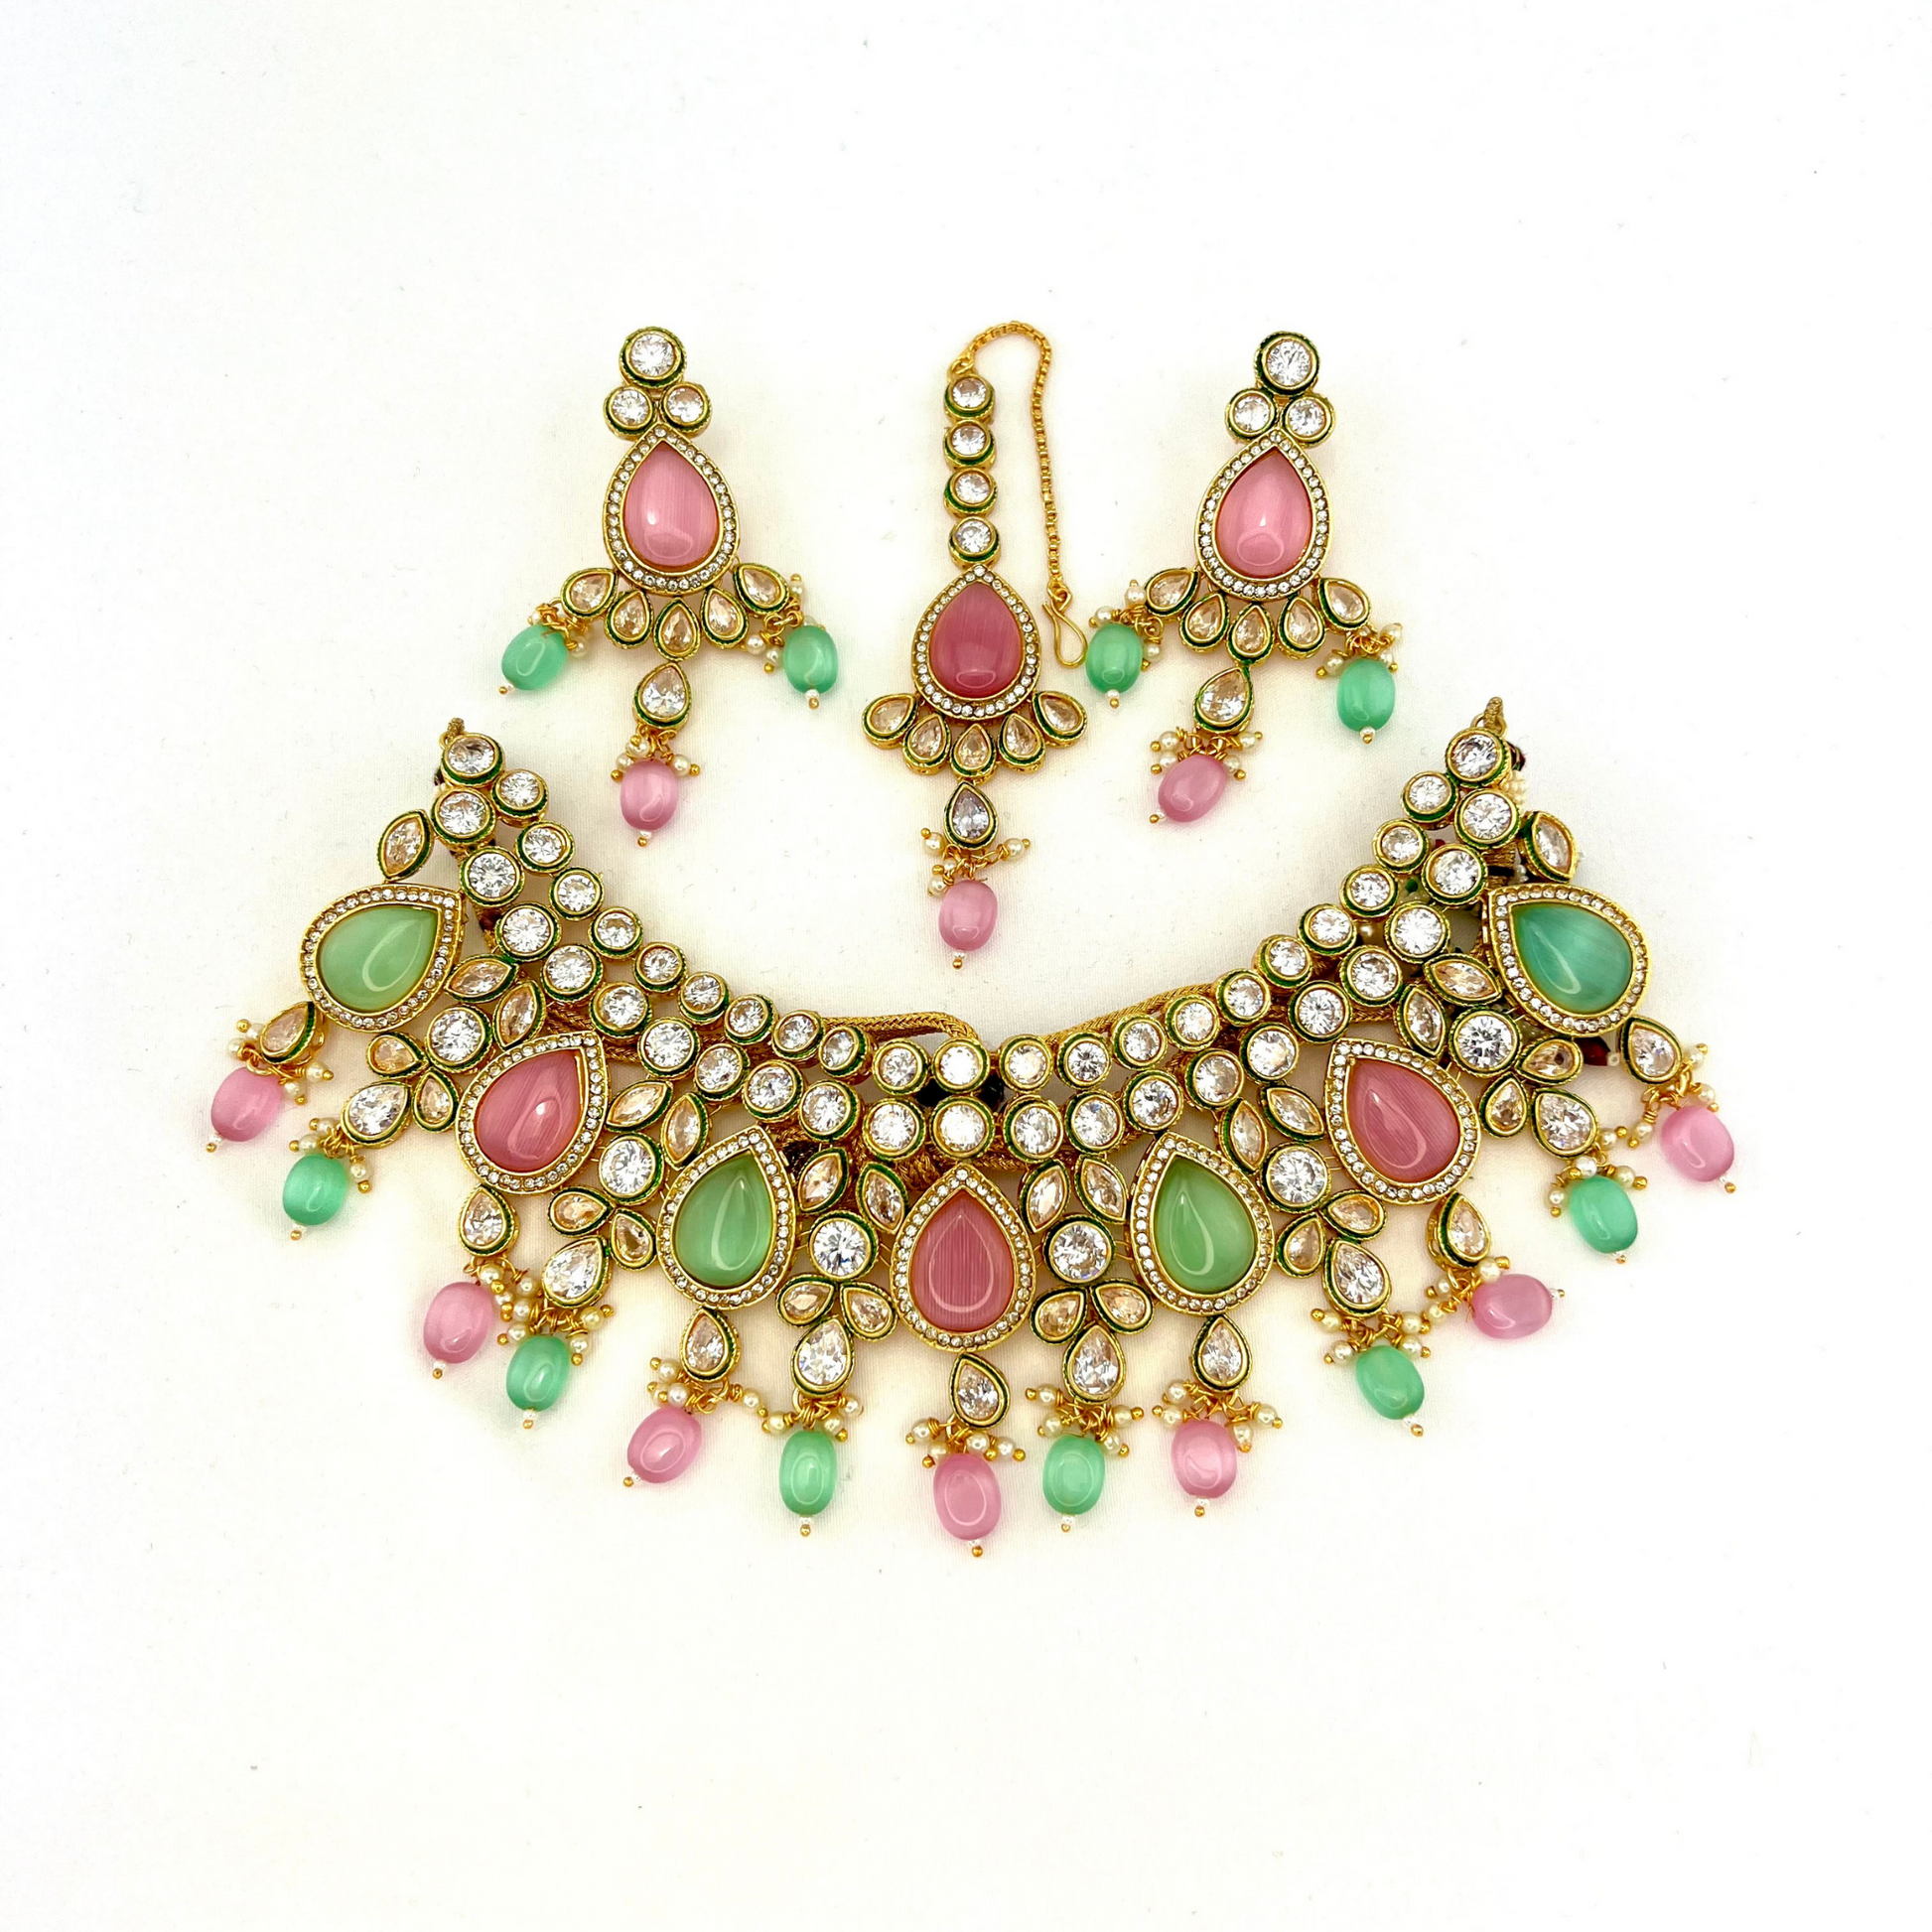 Necklace set with green, pink and clear stones and green and pink beads.  Set includes necklace, tikka and earrings.  Prefect for Indian weddings, parties and special occasions.   Latest 2022 fashion. High end Indian fashion jewellery with top quality stones and beads.